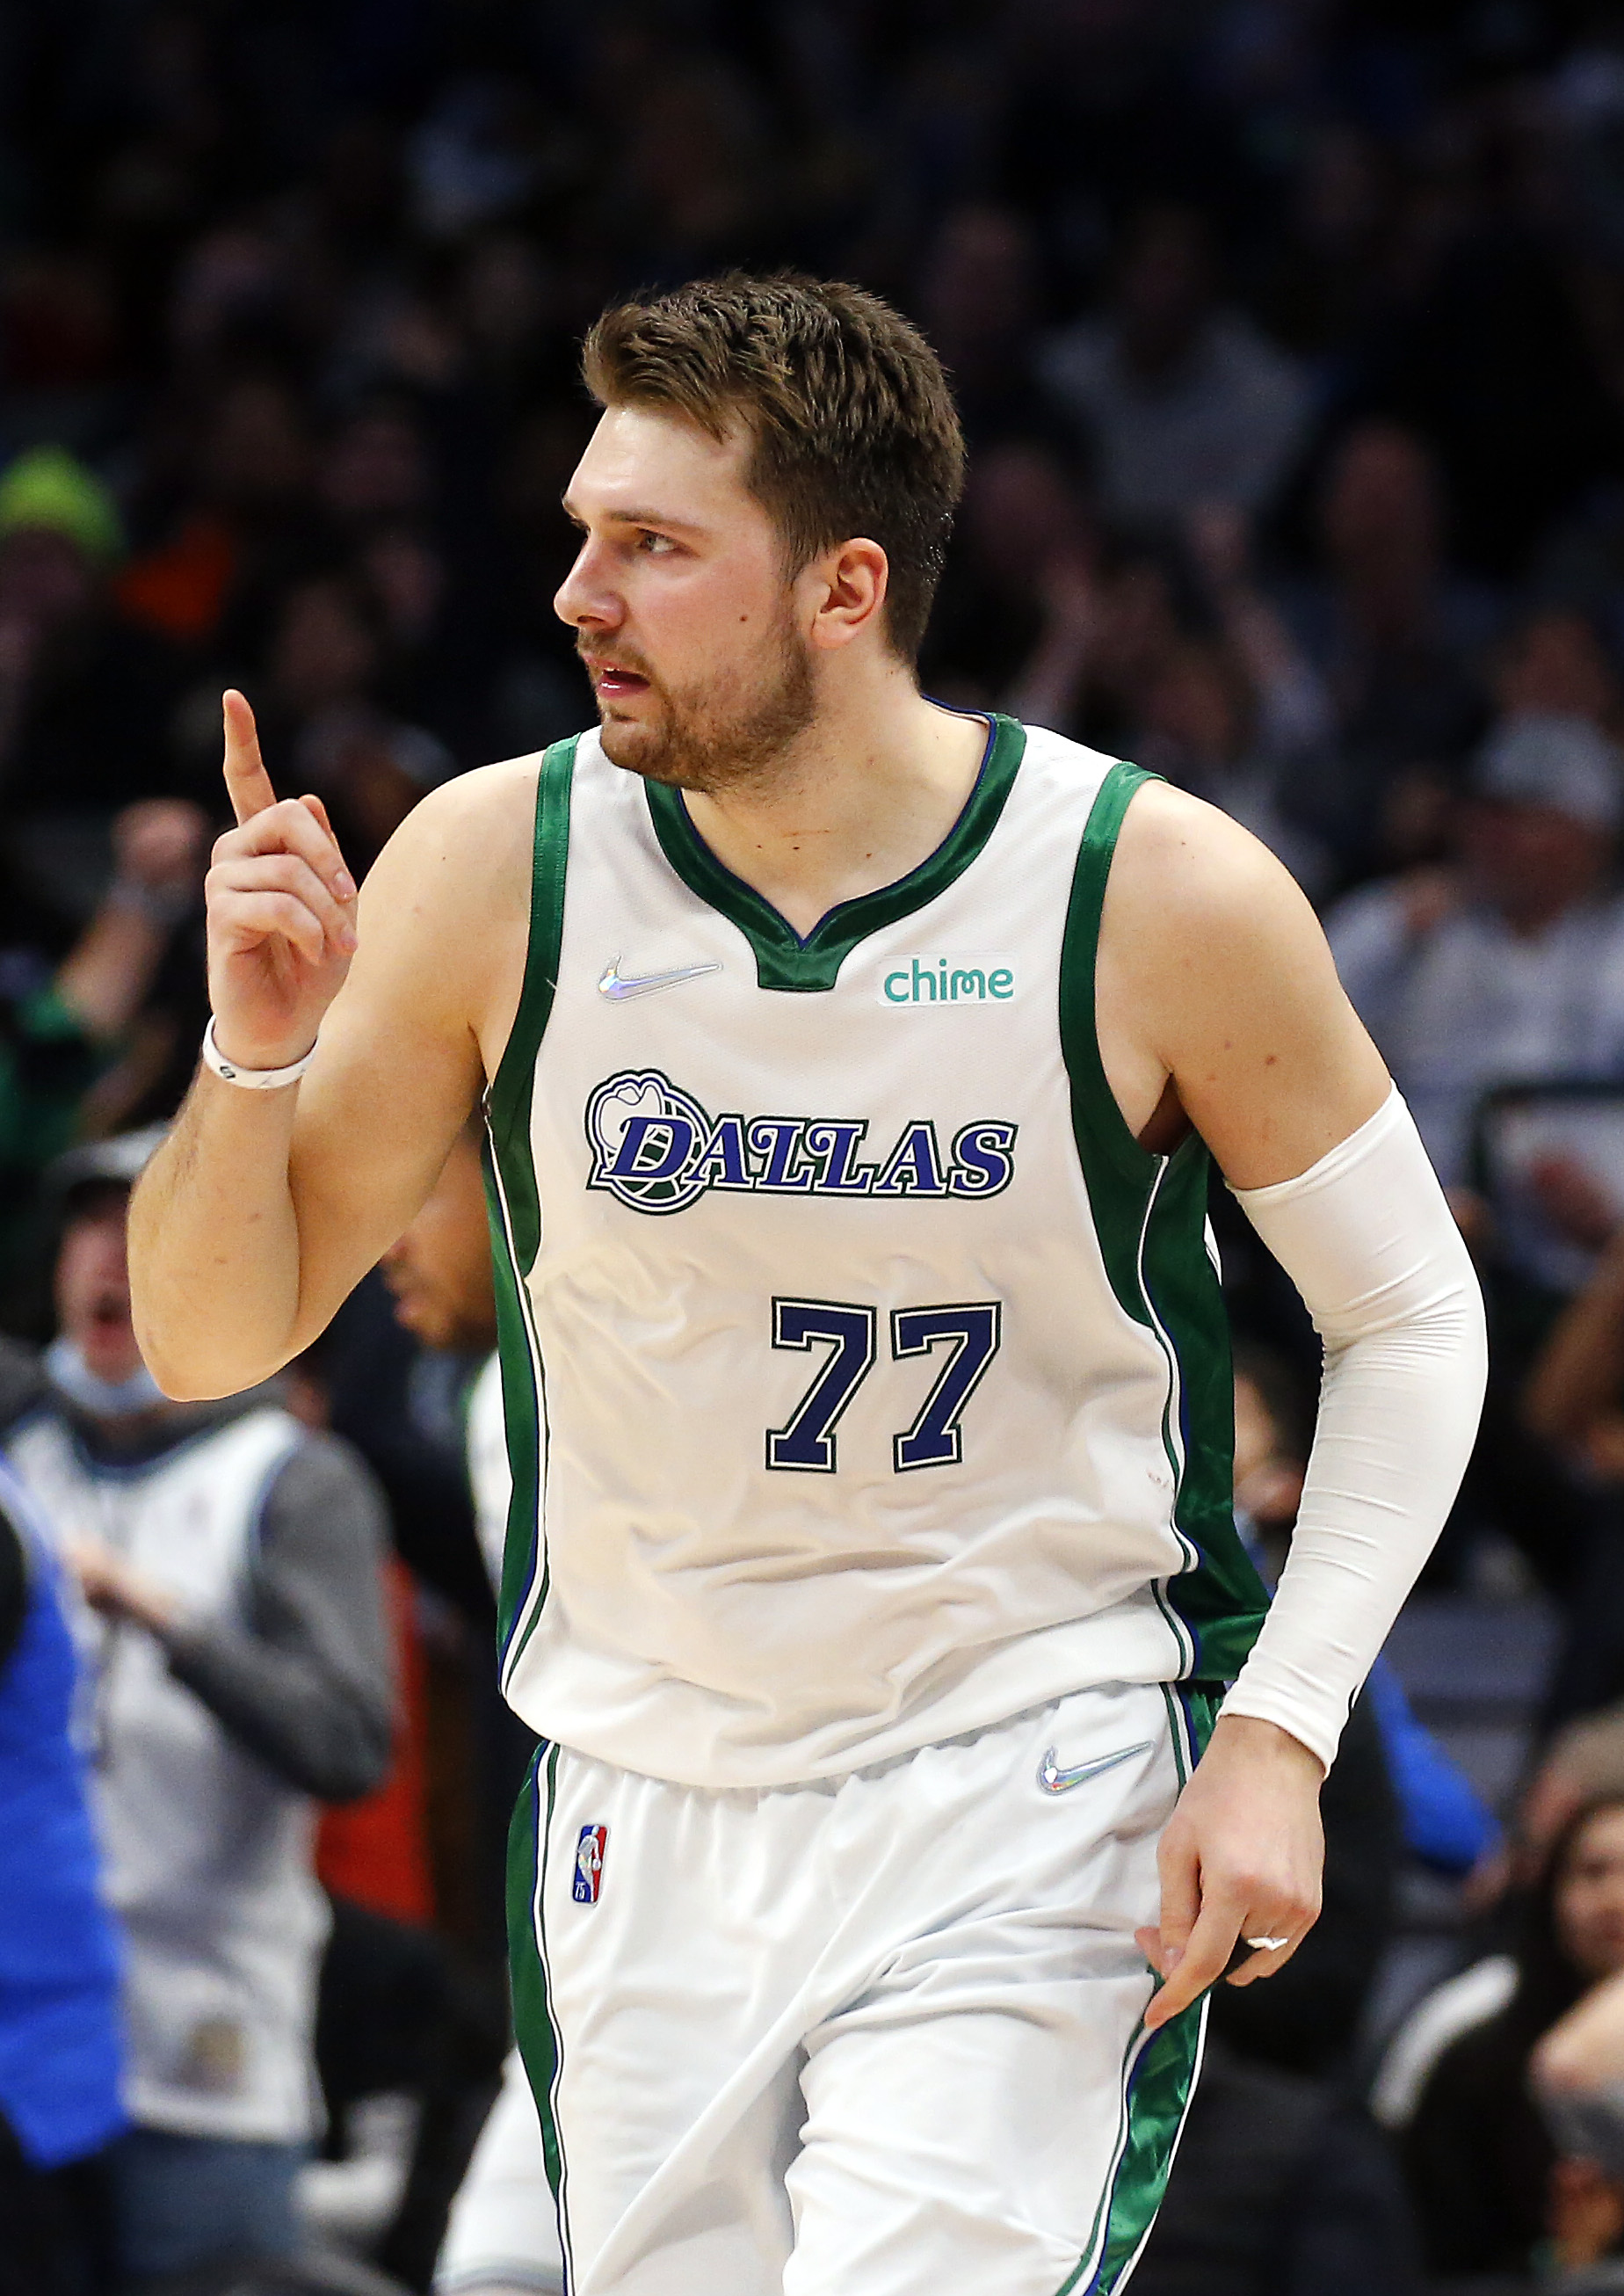 luka doncic all star 2022